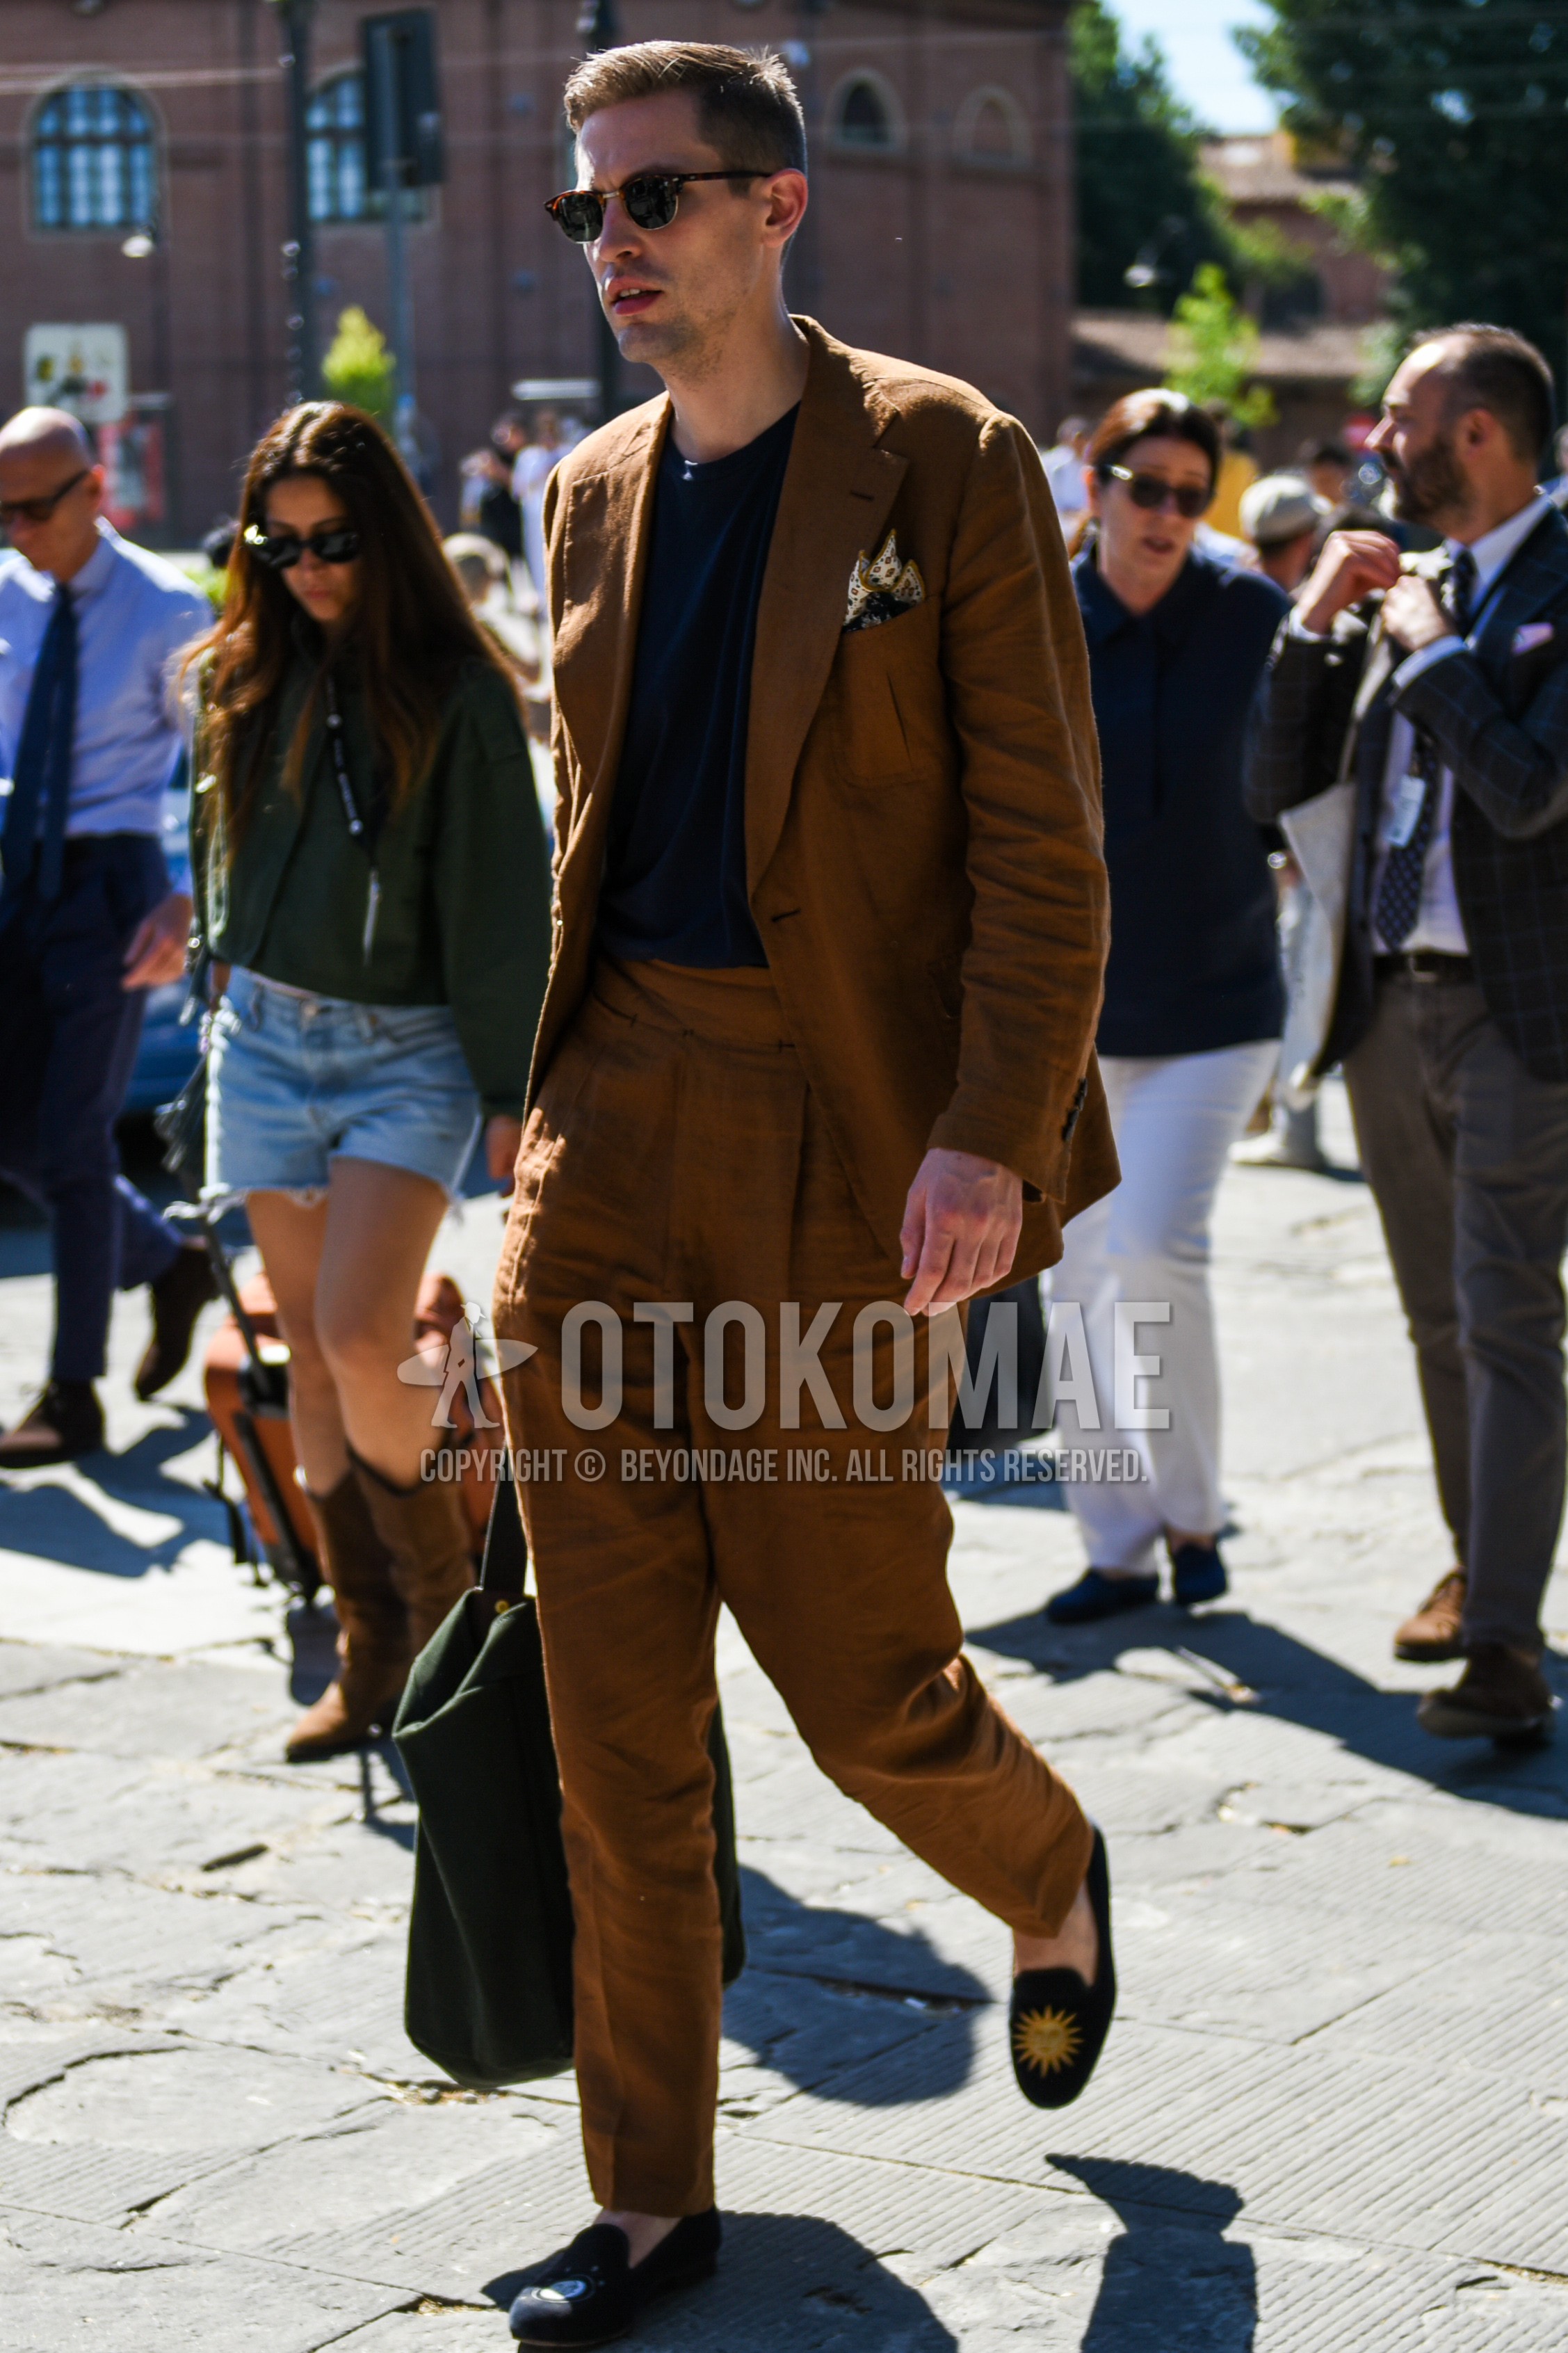 Men's spring summer autumn outfit with brown tortoiseshell sunglasses, navy plain t-shirt, navy  loafers leather shoes, olive green plain briefcase/handbag, brown plain suit.